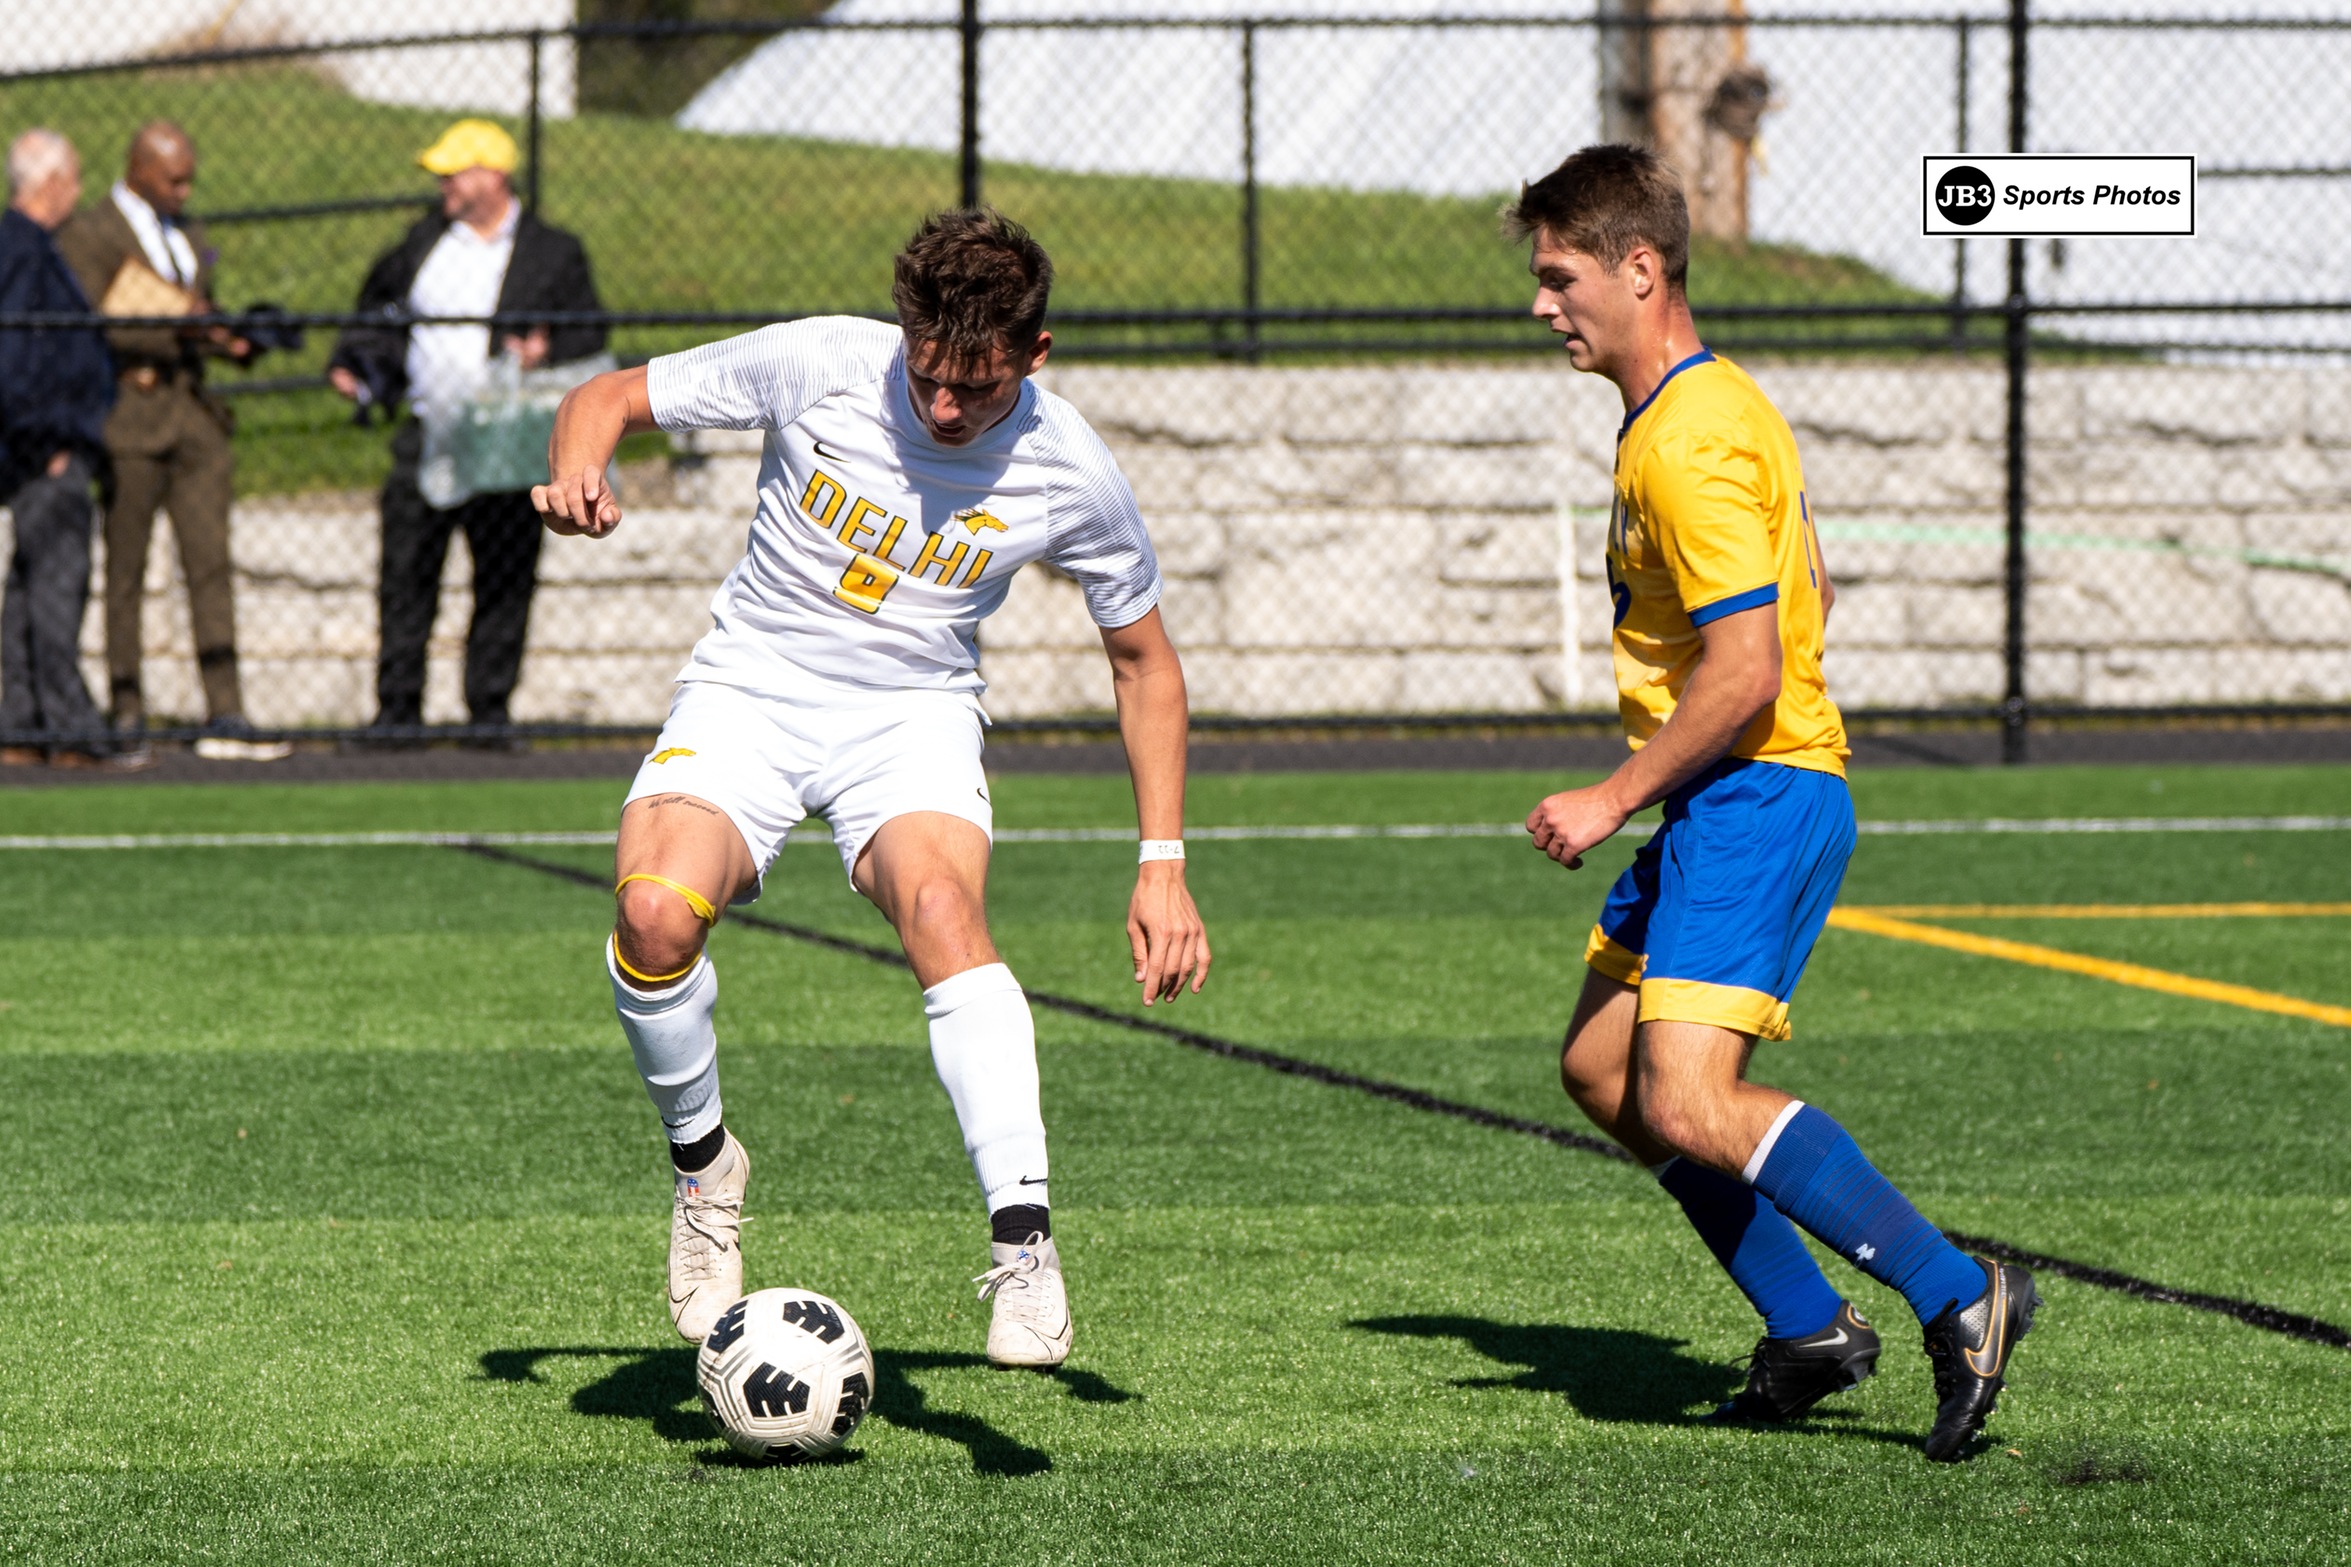 The Broncos Fall to SUNY Poly 3-1 on Saturday at Home